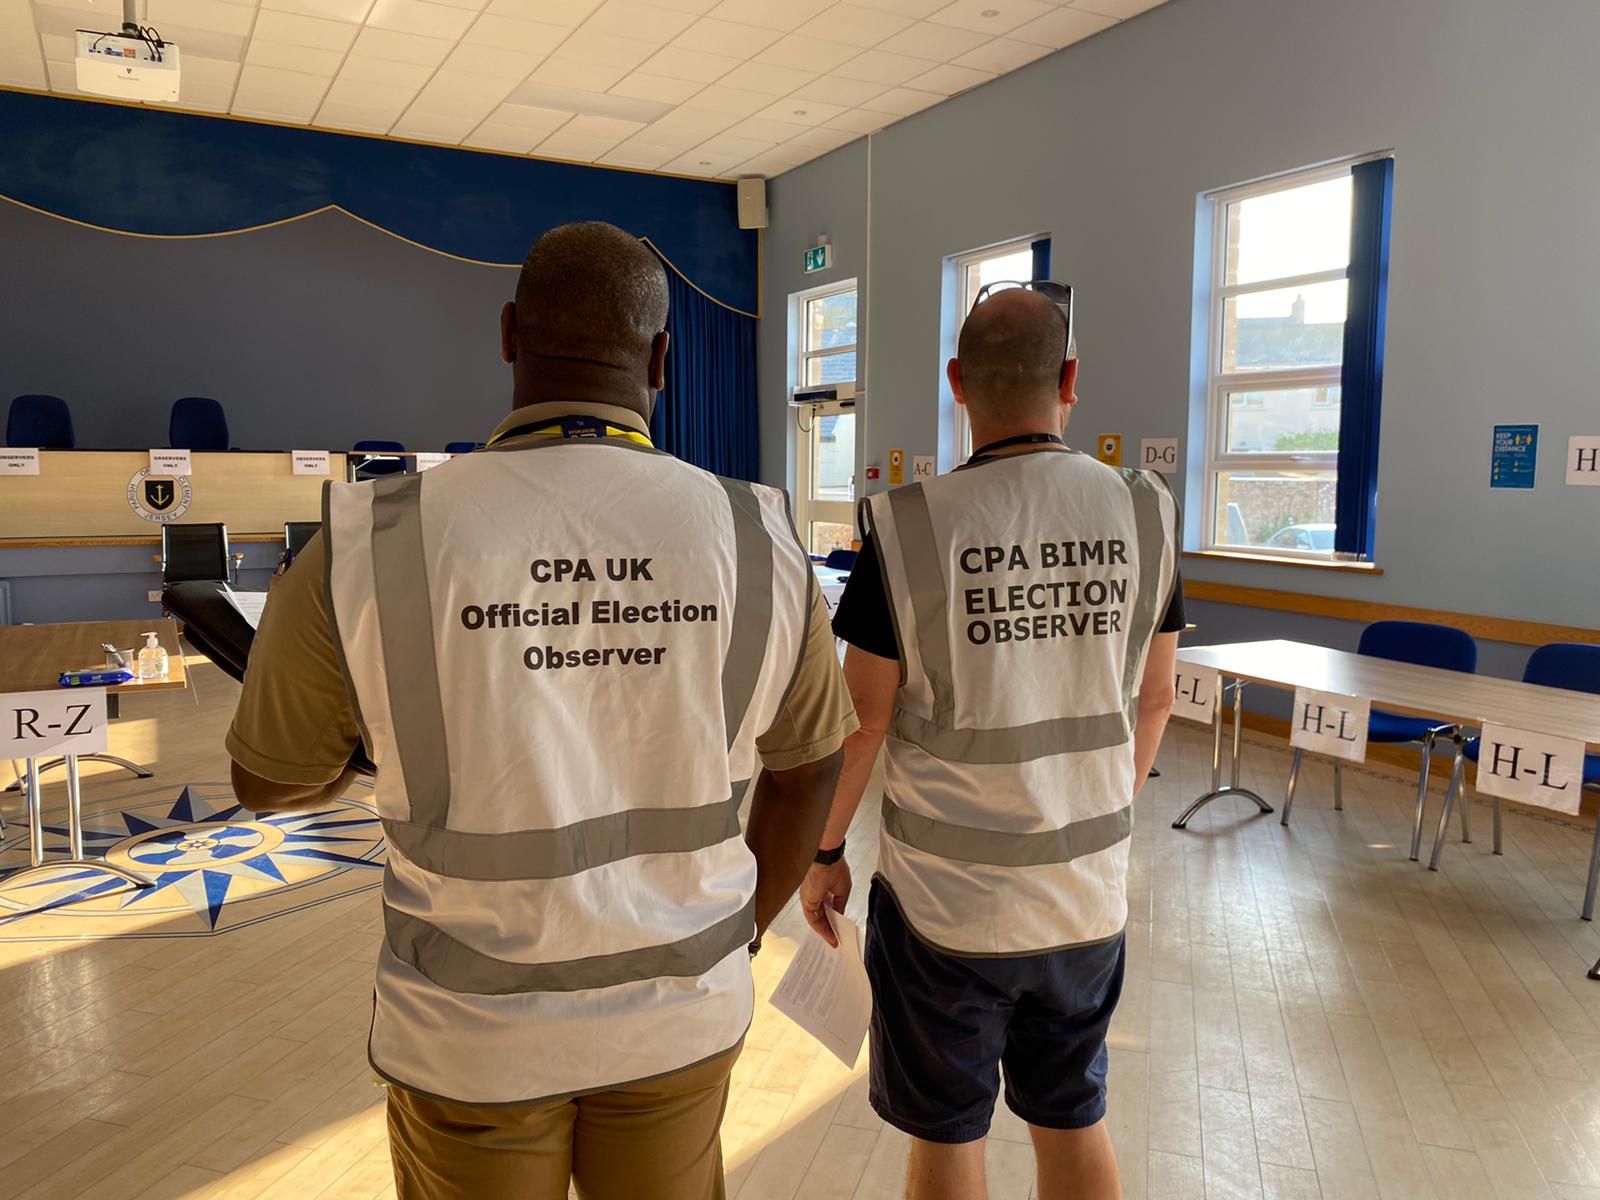 International Observers at a polling station